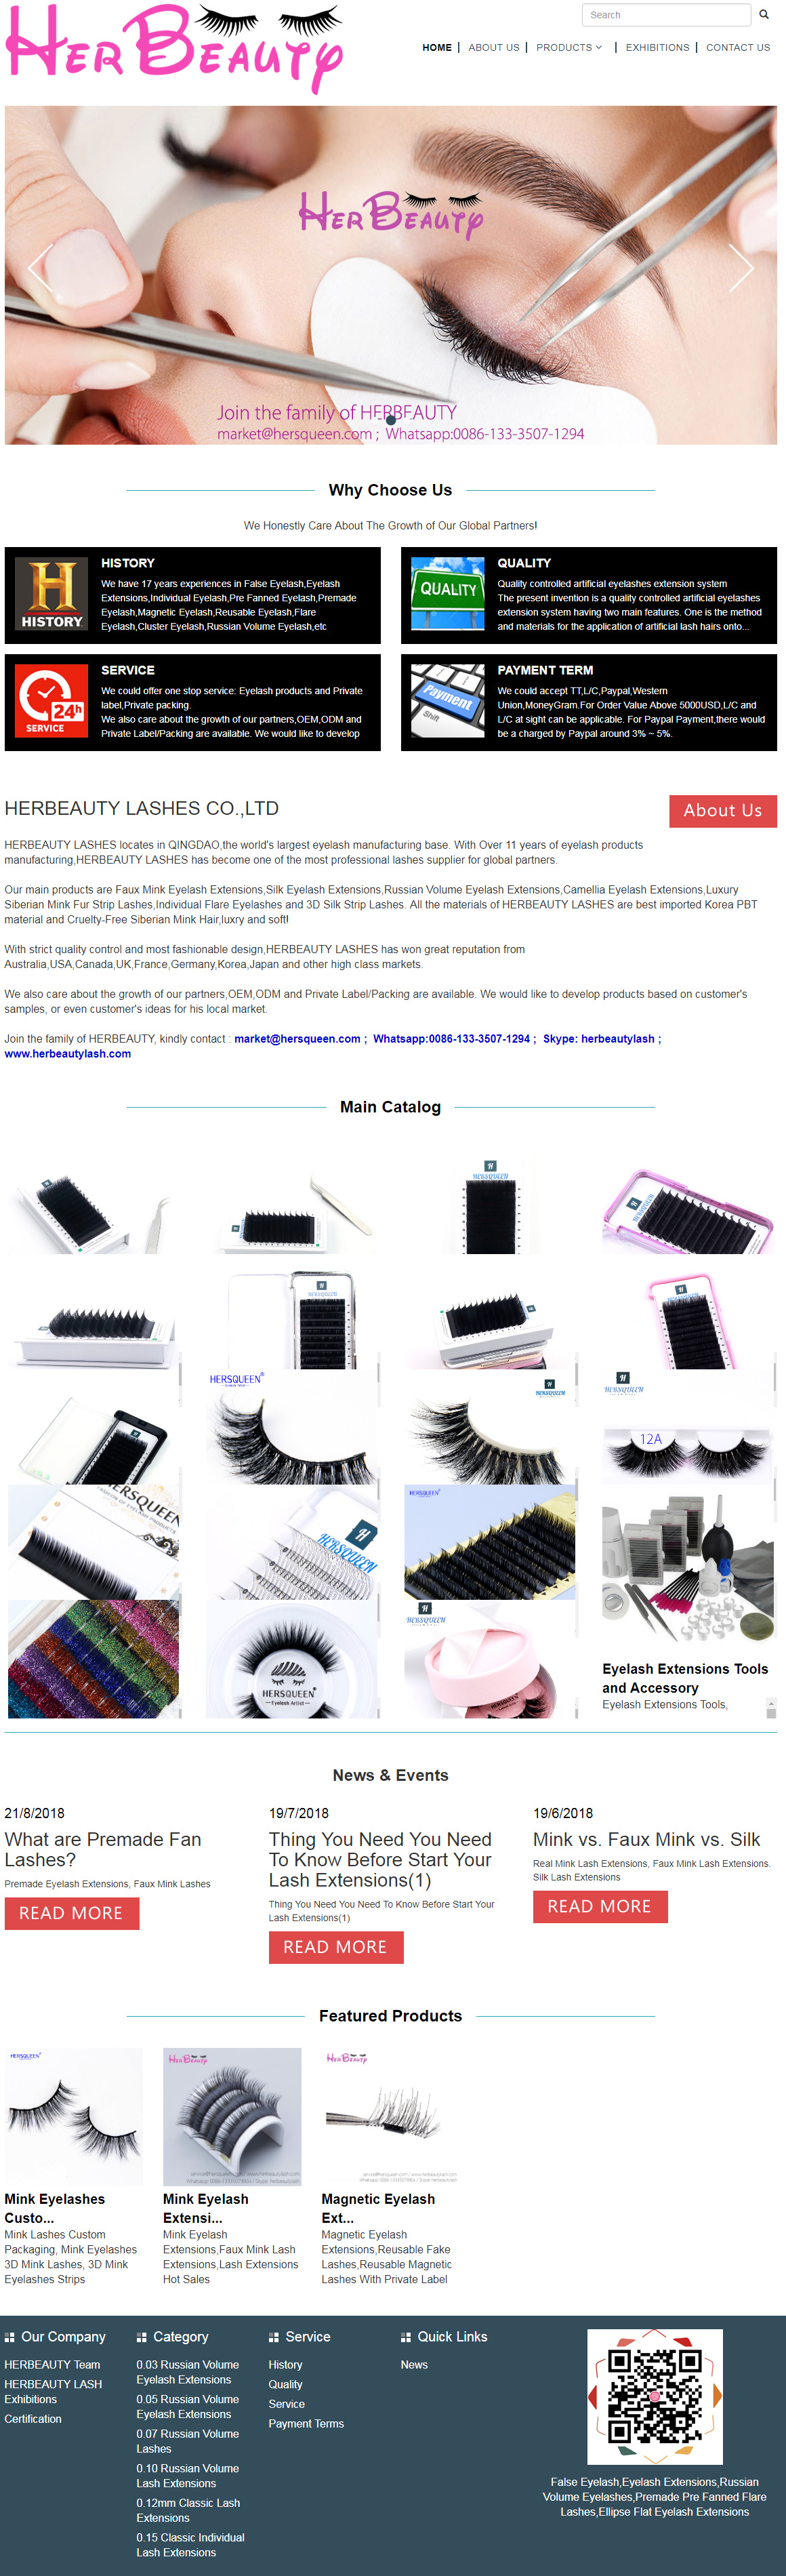 Wholesale-Mink-Eyelash-Extensions-manufacturers,-Individual-Eyelash-Extensions-suppliers,-China-Russian-Volume-Eyelash-Extensions-factory-–-HERBEAUTY-LASHES.jpg